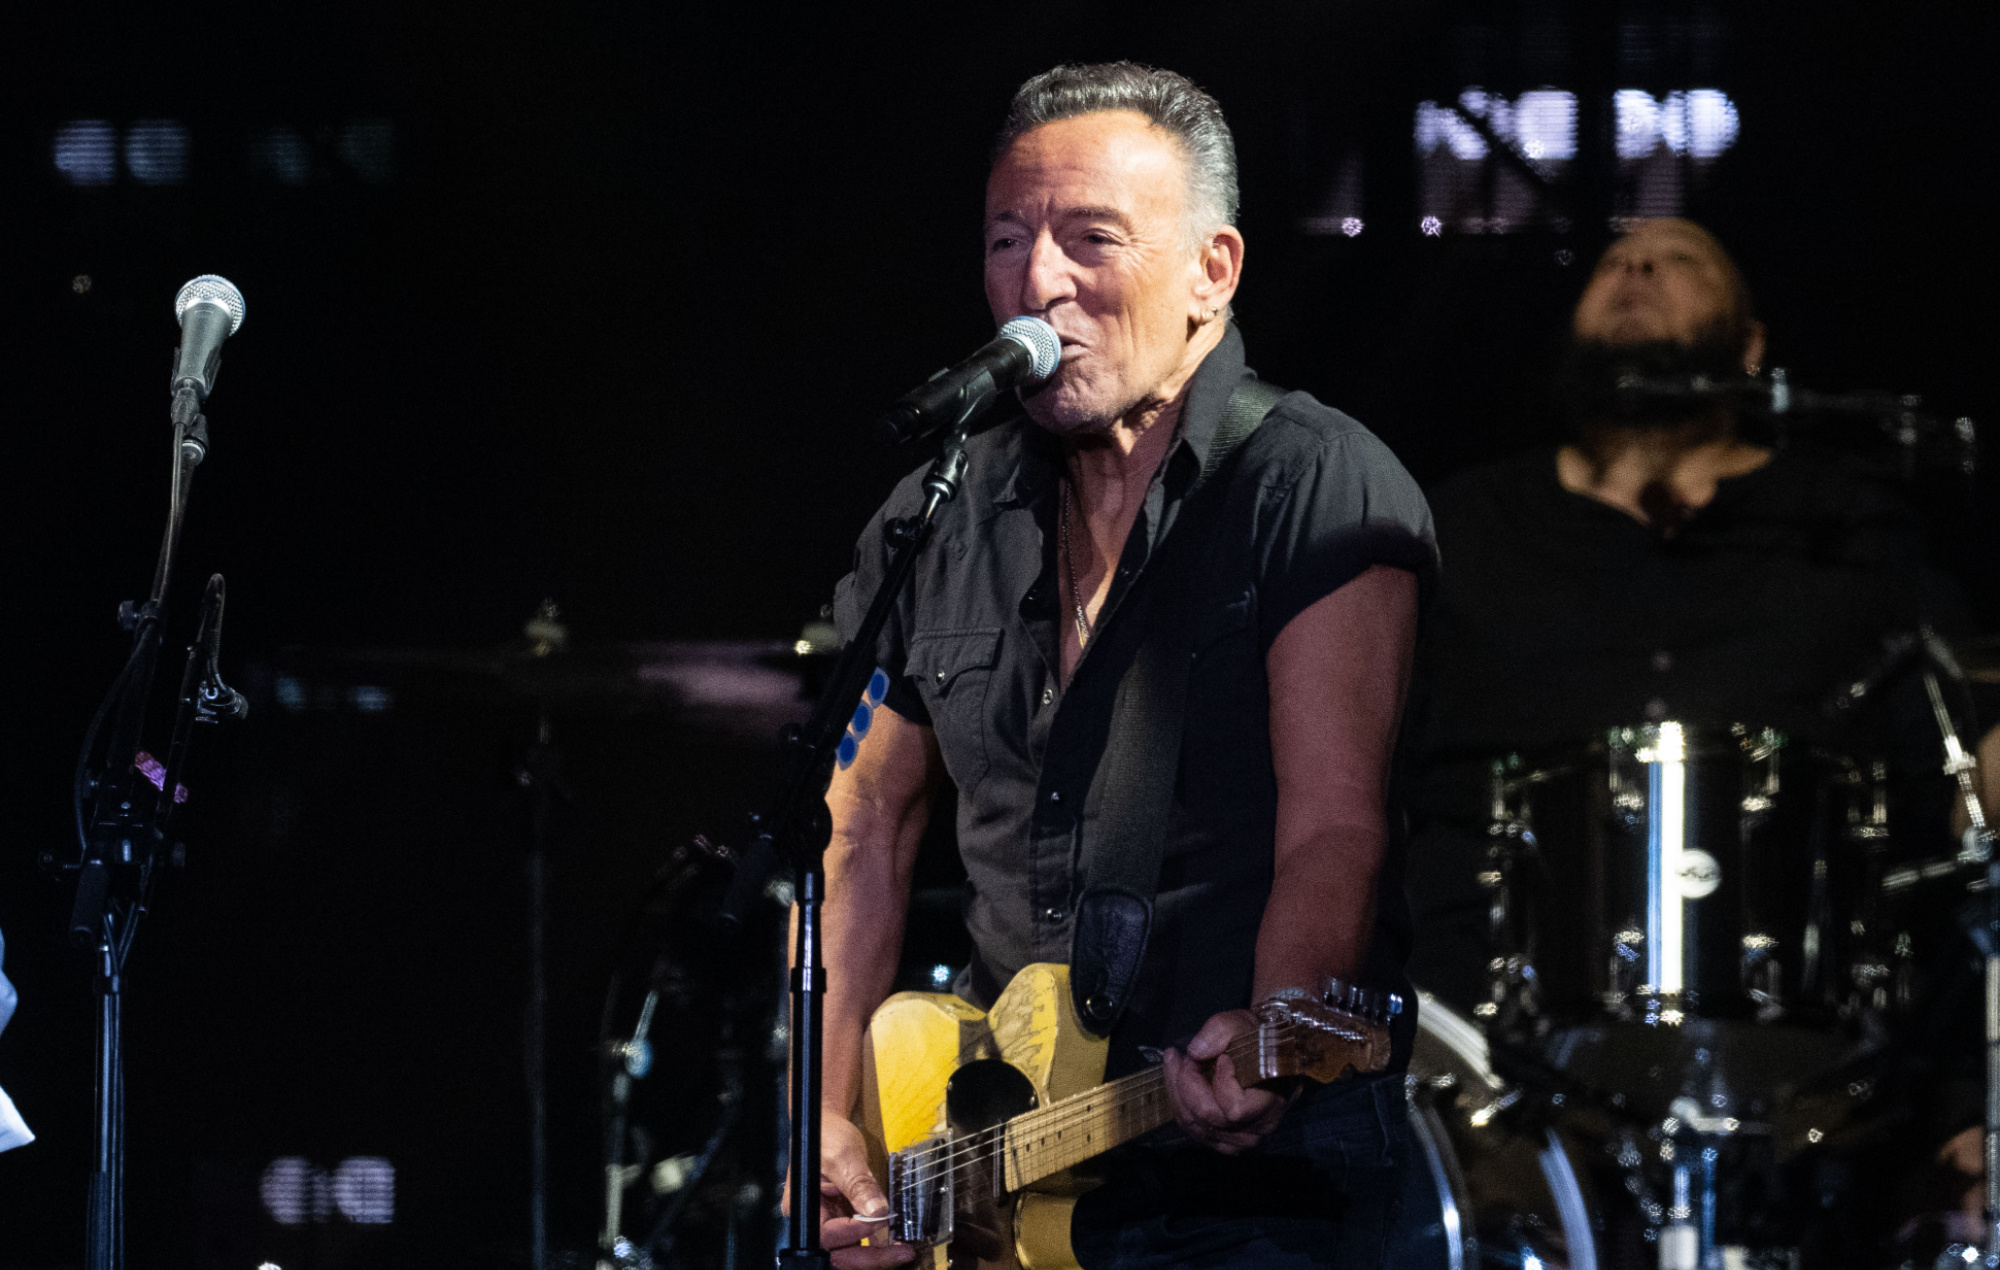 Bruce Springsteen, Ticket price criticism, Manager's response, Fair value discussion, 2000x1270 HD Desktop